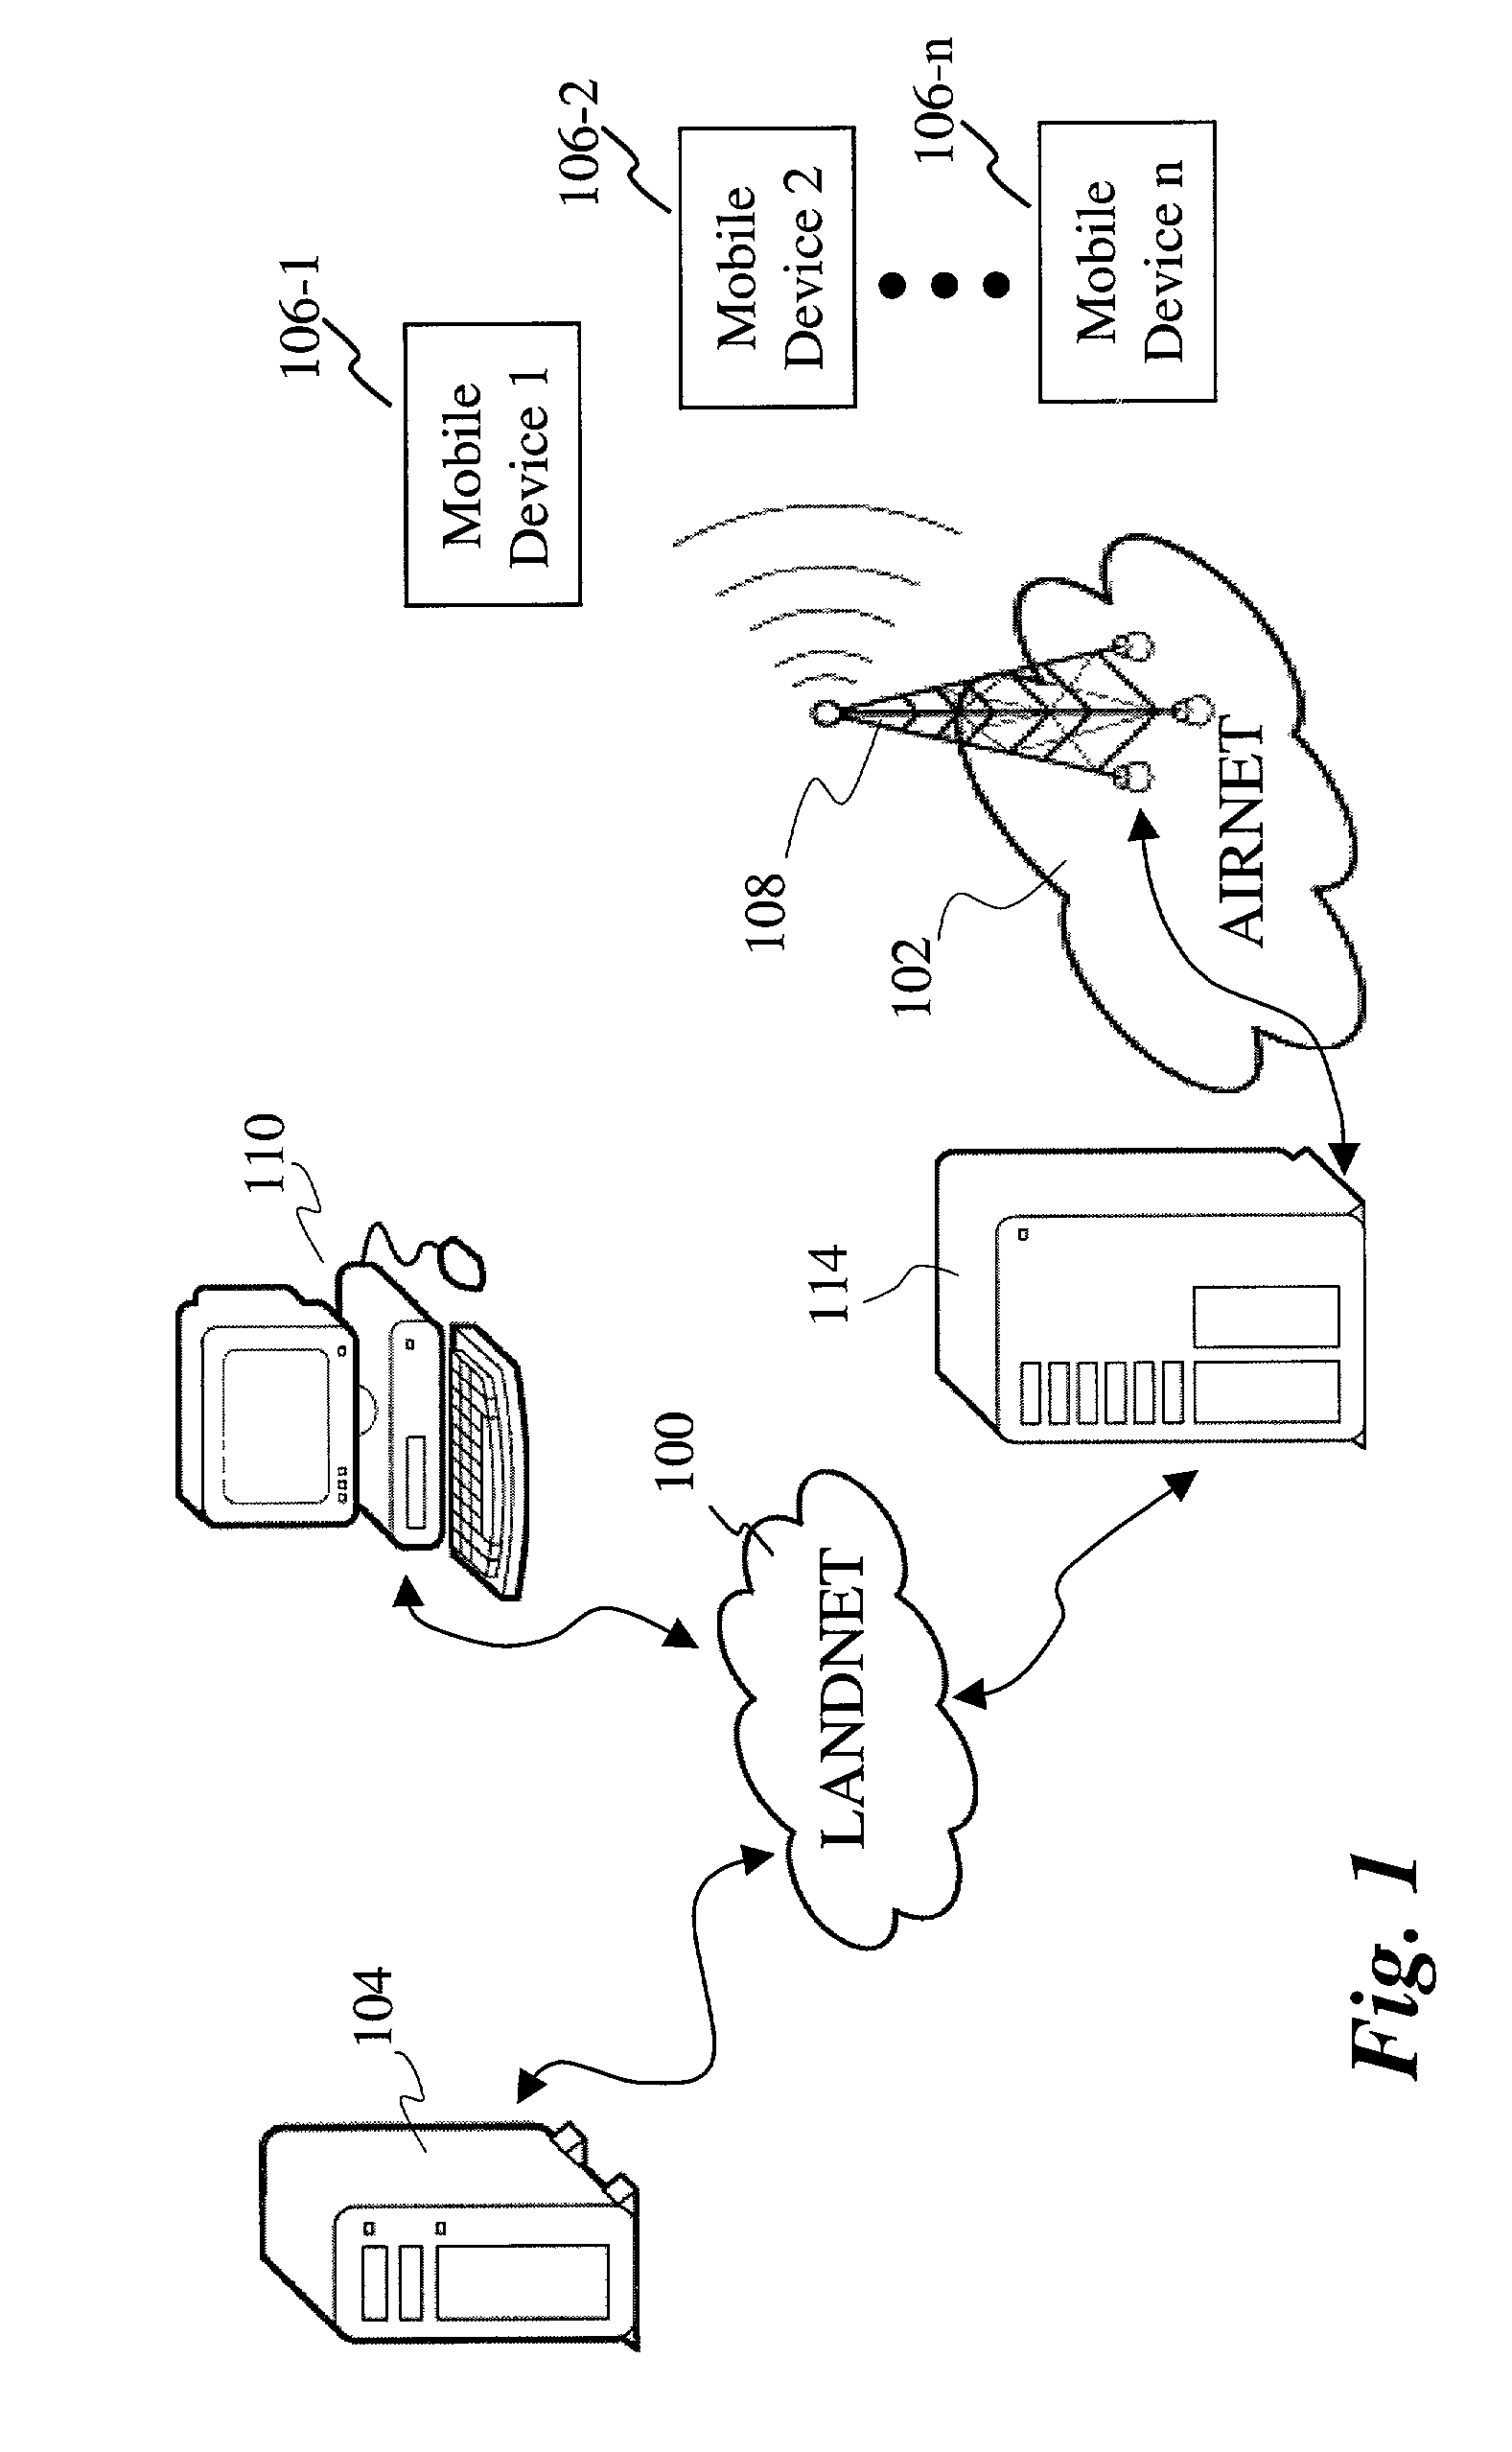 Method and architecture for interactive two-way communication devices to interact with a network